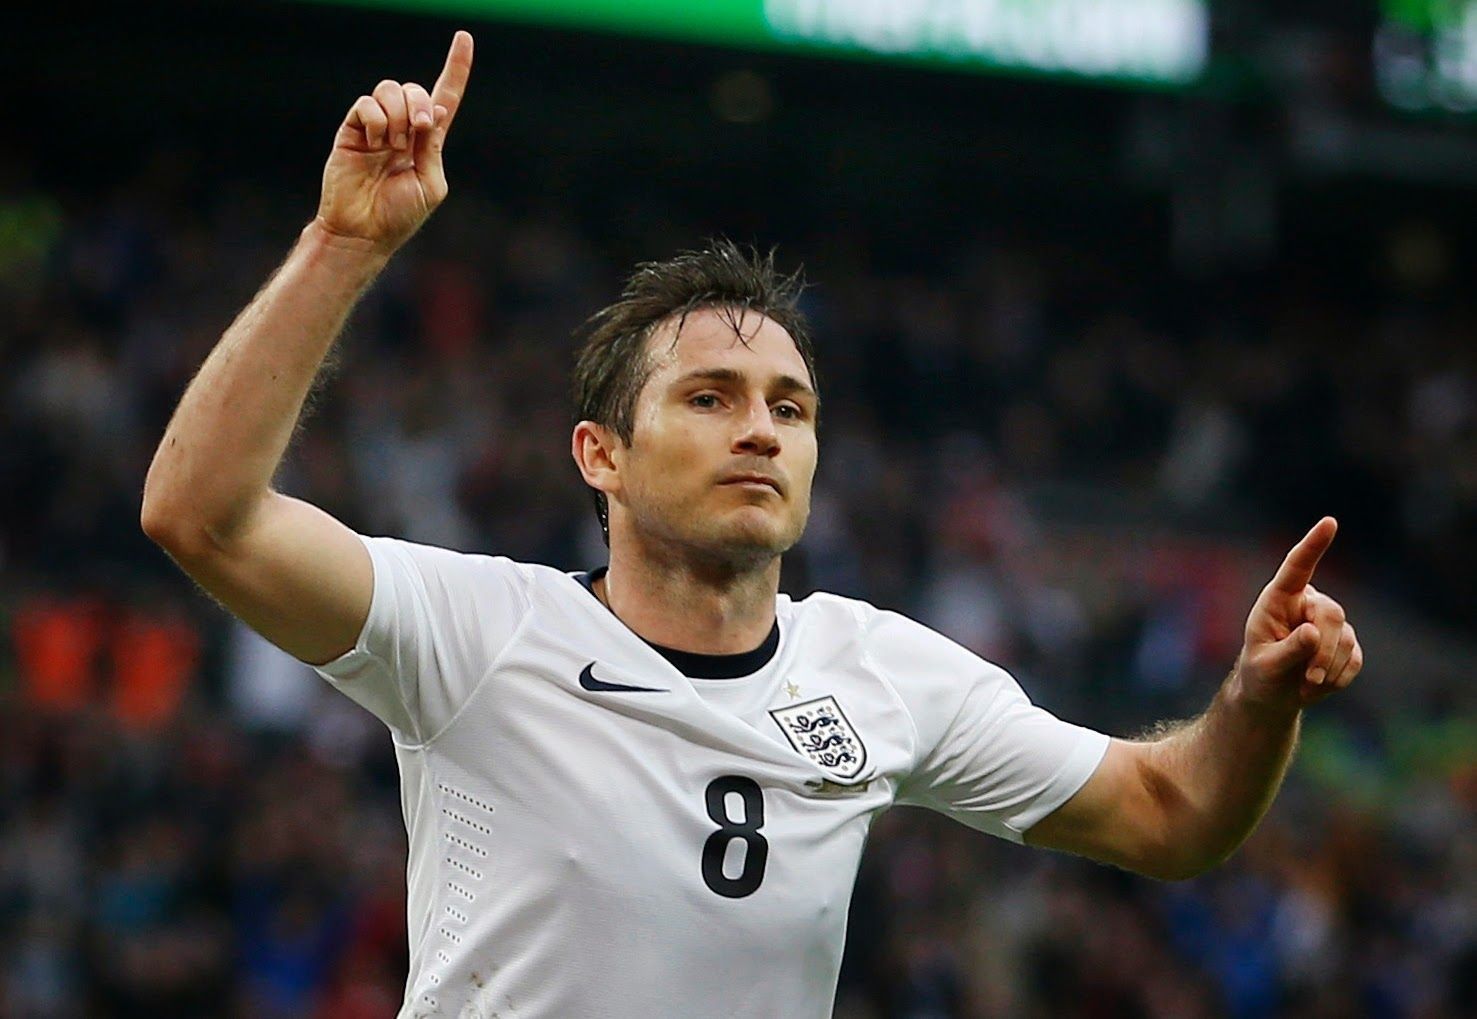 Frank Lampard celebrating a goal for England